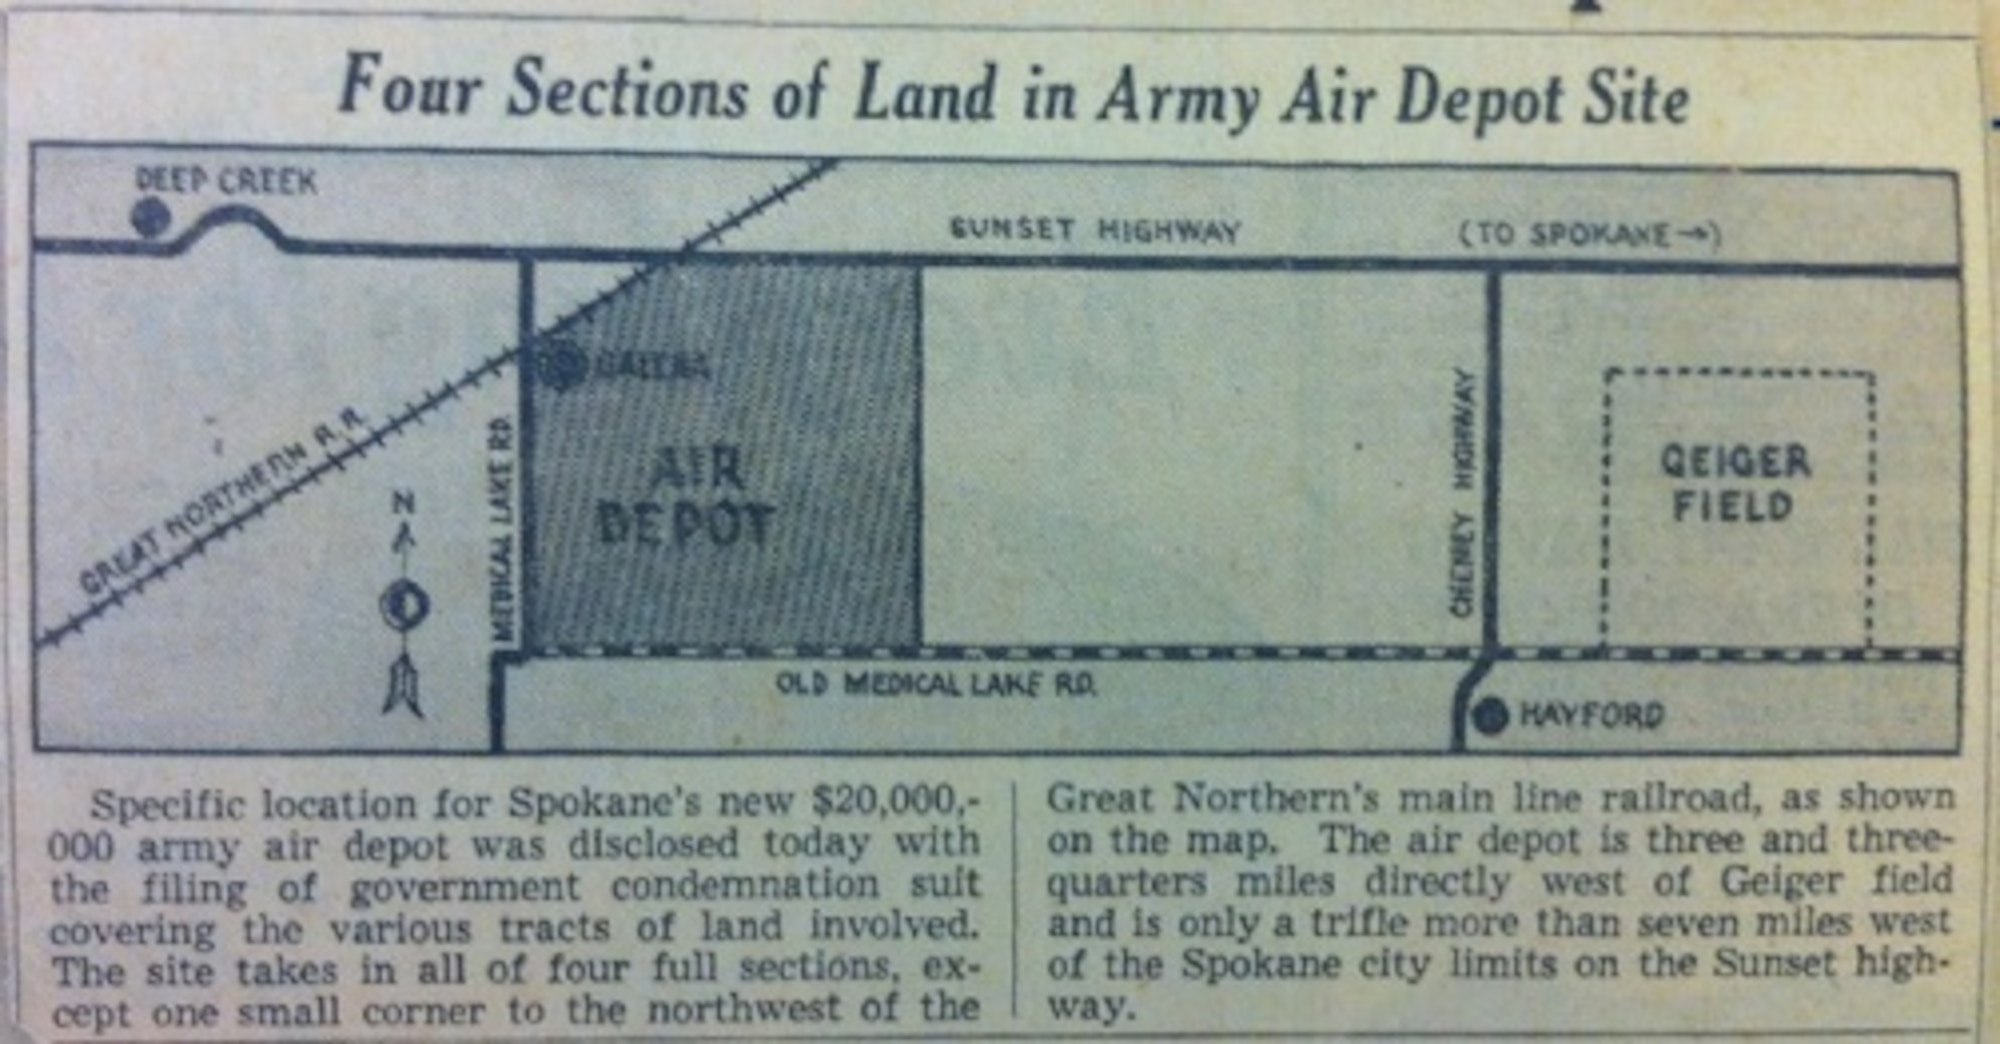 The Spokane Daily Chronicle featured the location and news of early plans for the Spokane Army Air Depot on Nov. 17, 1941. Photo provided by Mr. Jim O'Connell.